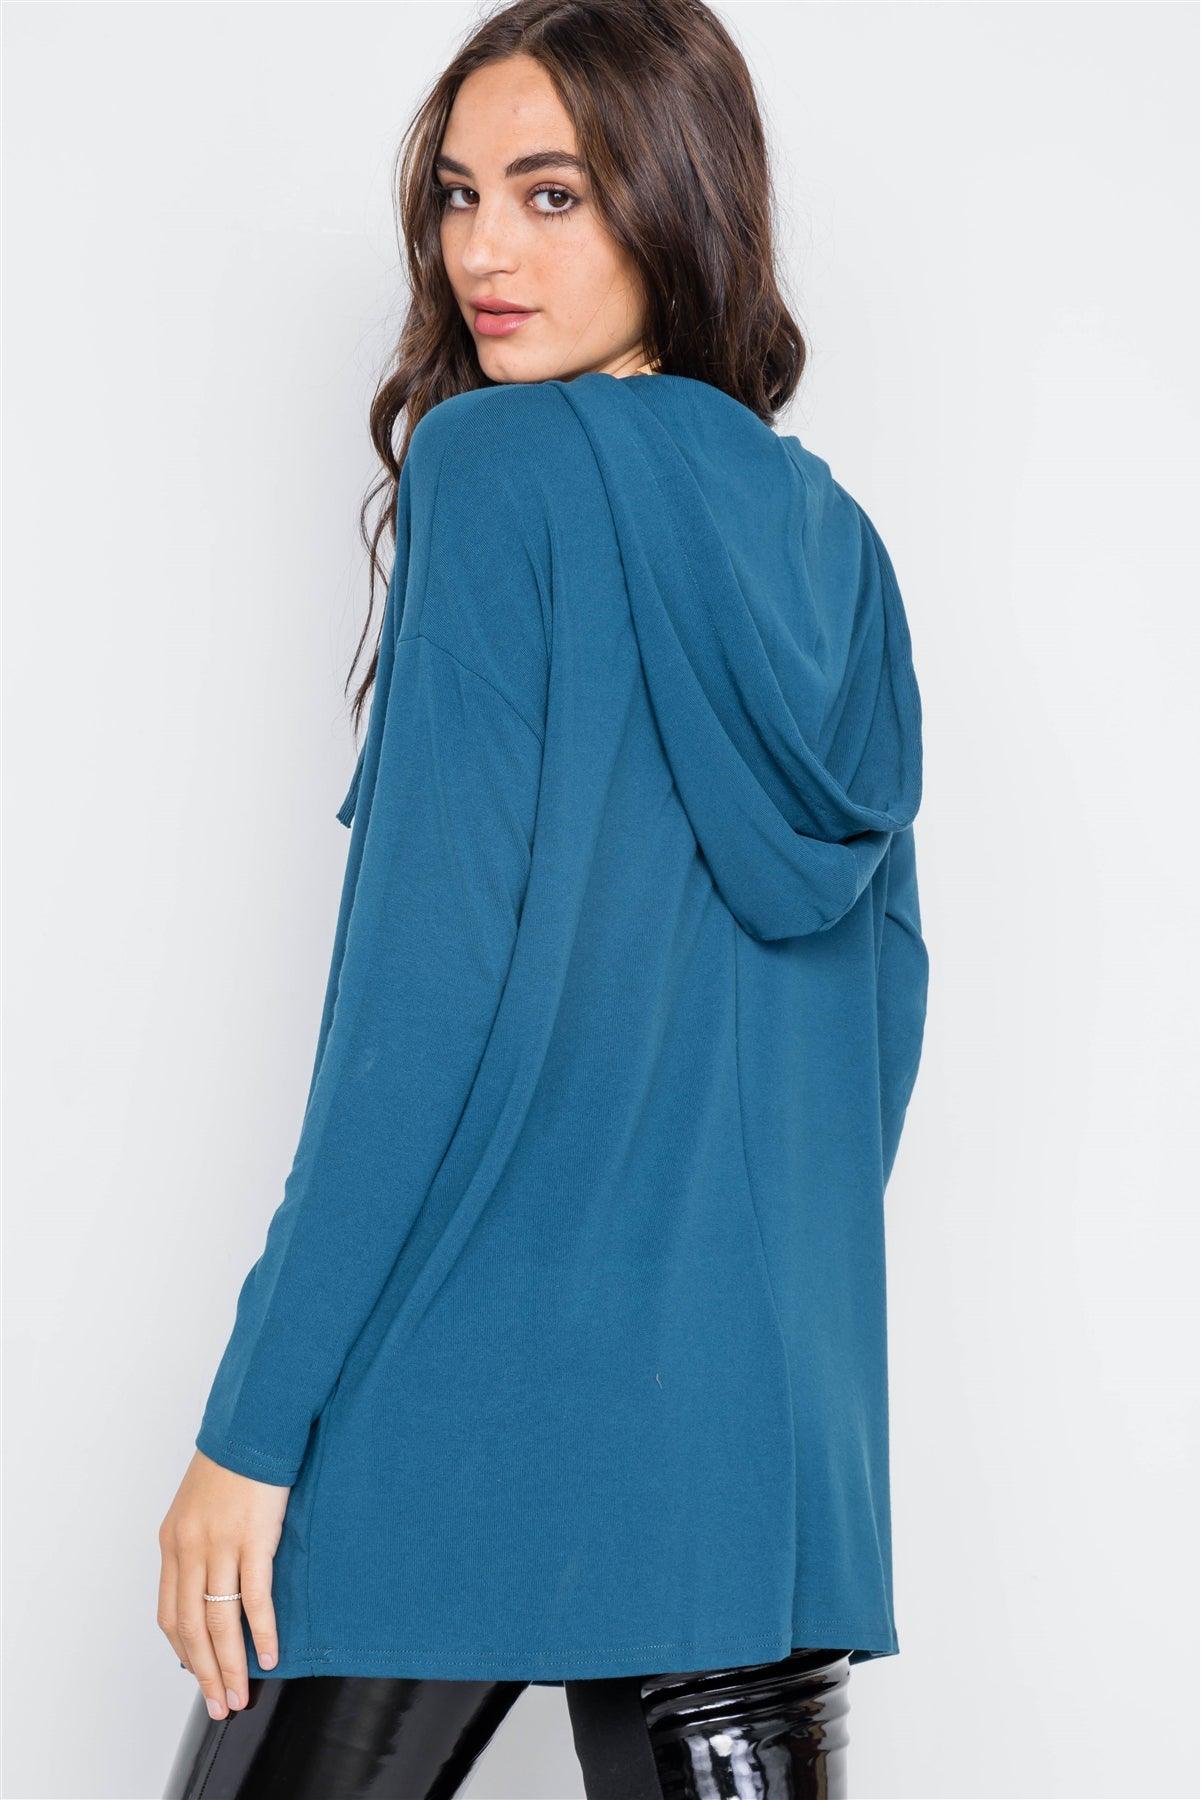 Teal Knit Long Sleeve Hooded Solid Sweater